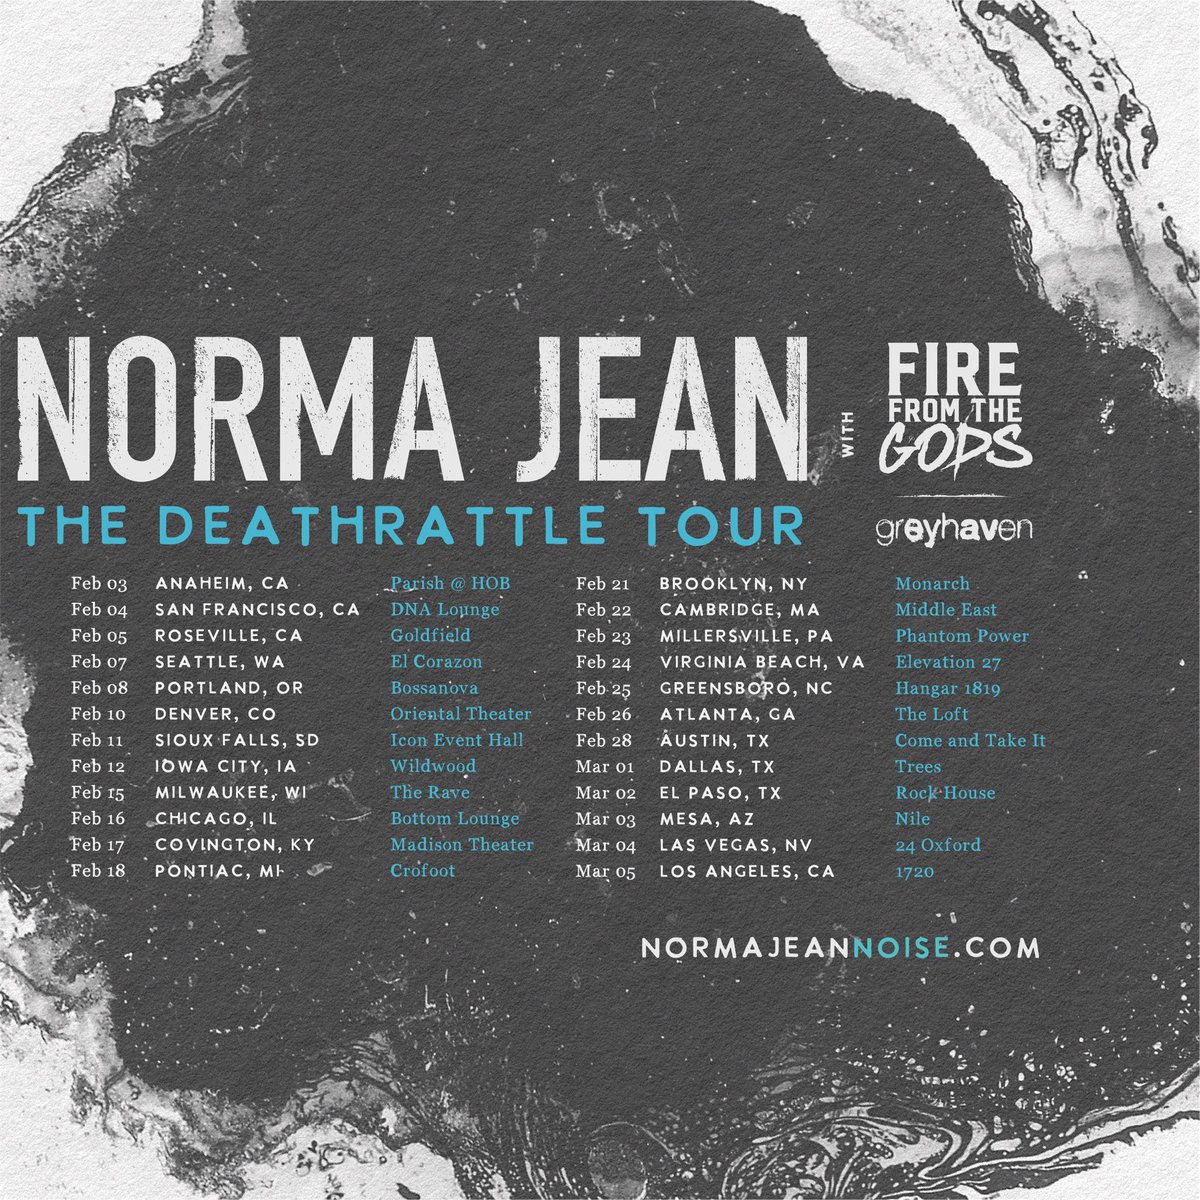 The Almighty Norma Jean on Twitter "𝙏𝙃𝙀 𝘿𝙀𝘼𝙏𝙃𝙍𝘼𝙏𝙏𝙇𝙀 𝙏𝙊𝙐𝙍, coming